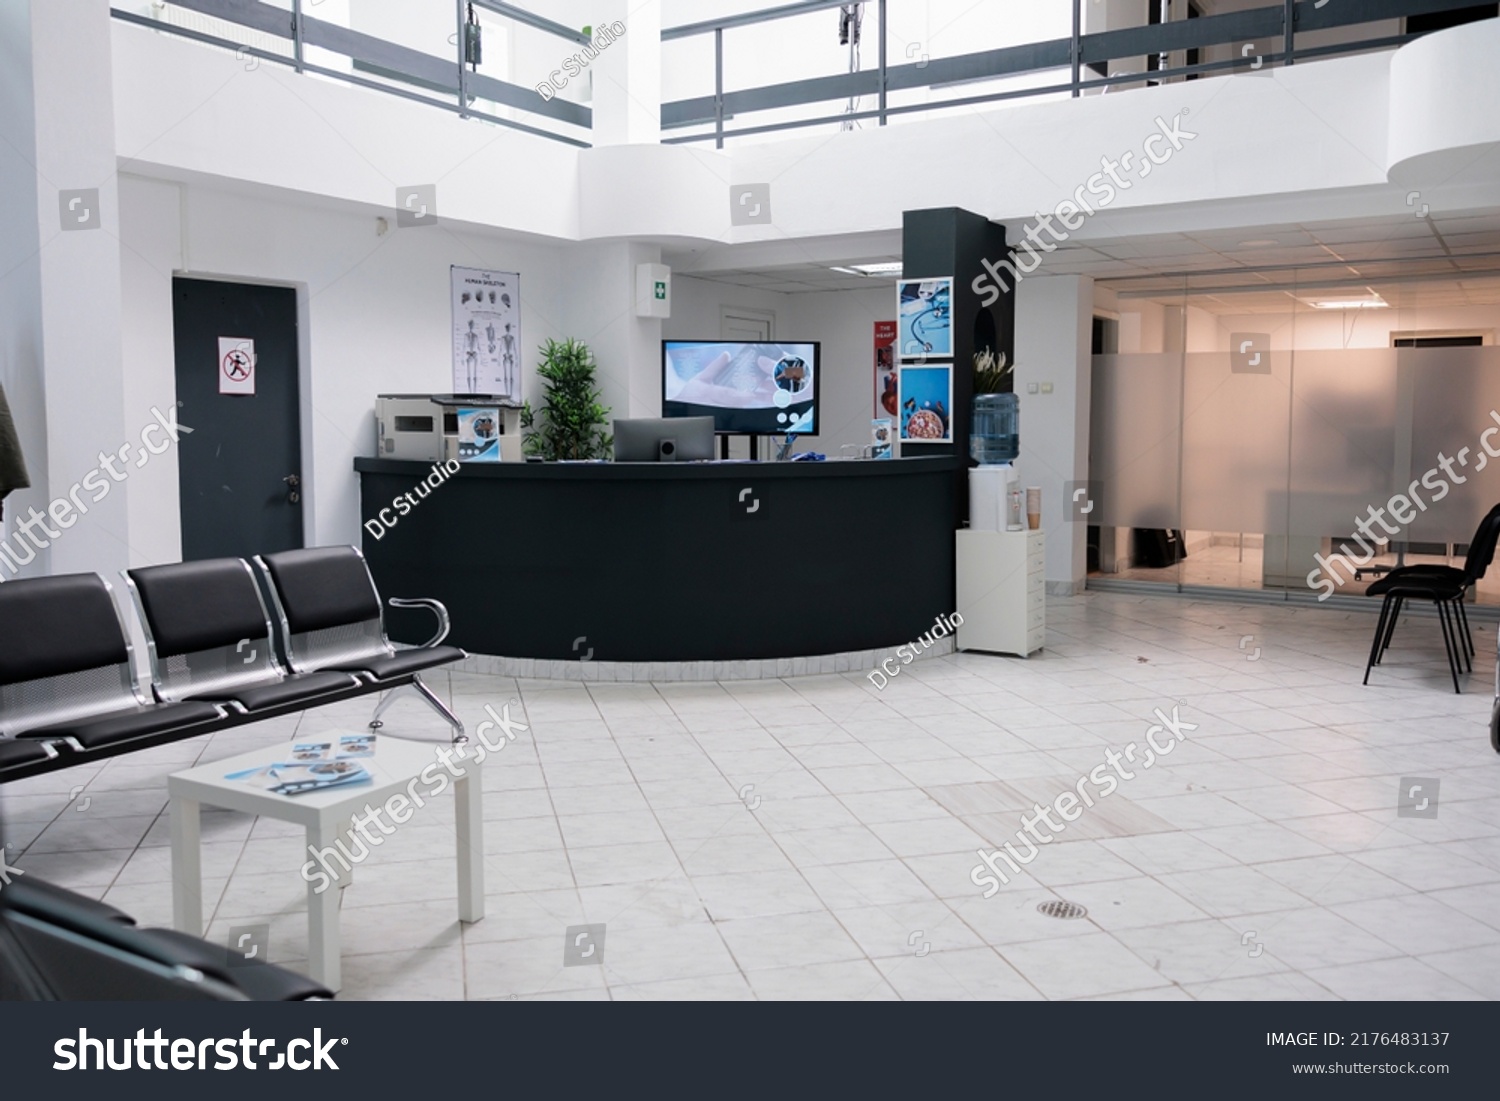 No people in waiting area for patients with doctor appointments in modern healthcare clinic in private practice hopital. Empty waiting room with front desk reception with promotional flyers. #2176483137